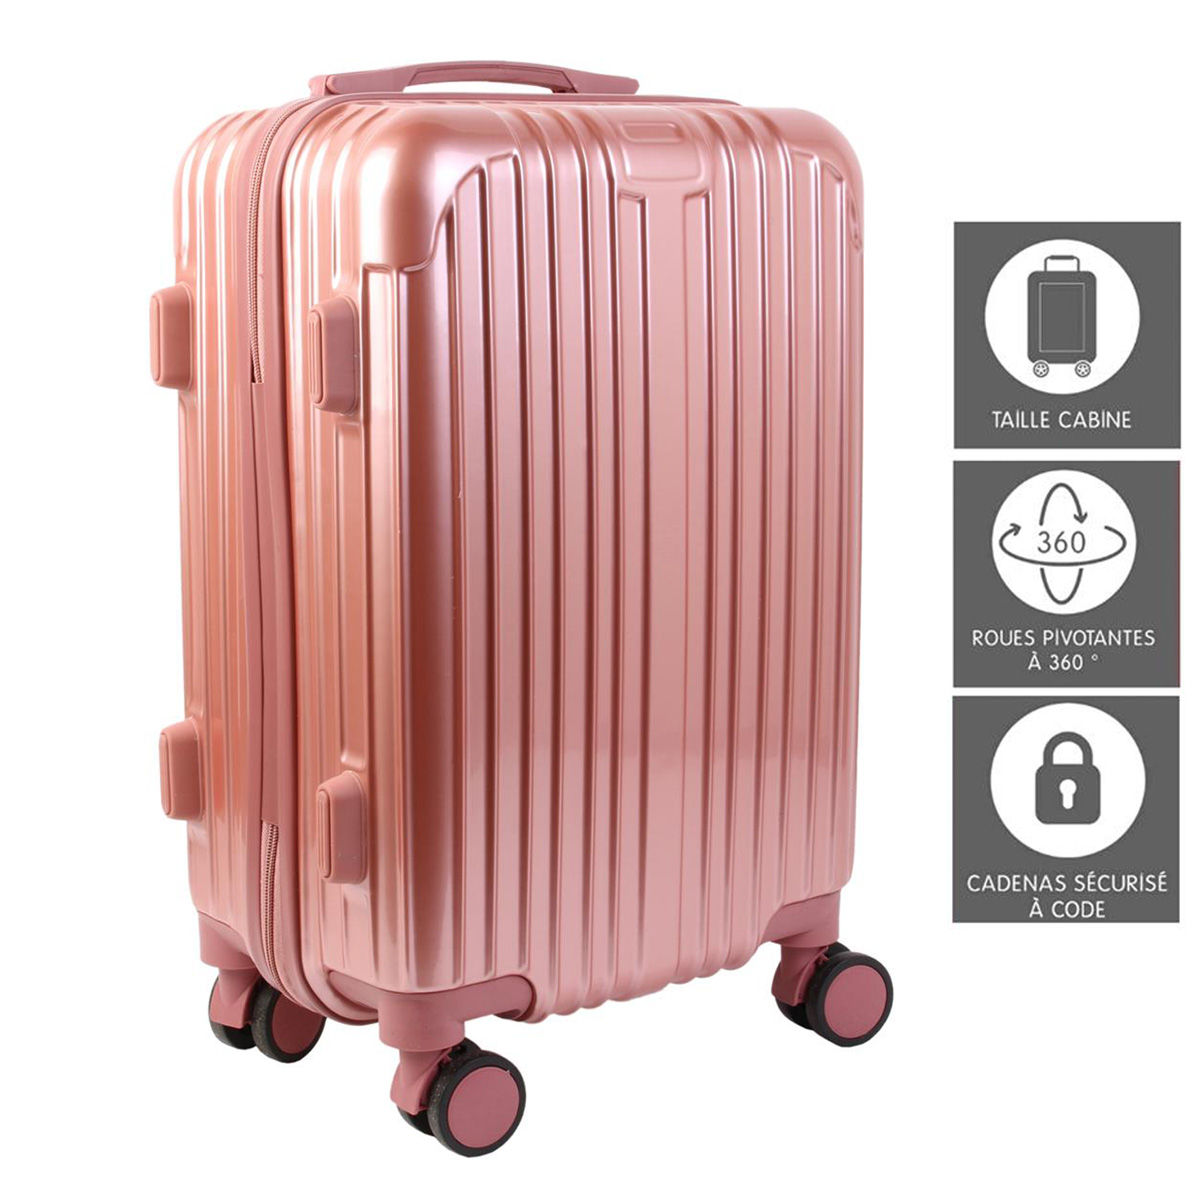 Valise trolley ABS \'Globe Trotteur\' rose gold - 57x35x24 cm (40L) - [A0183]